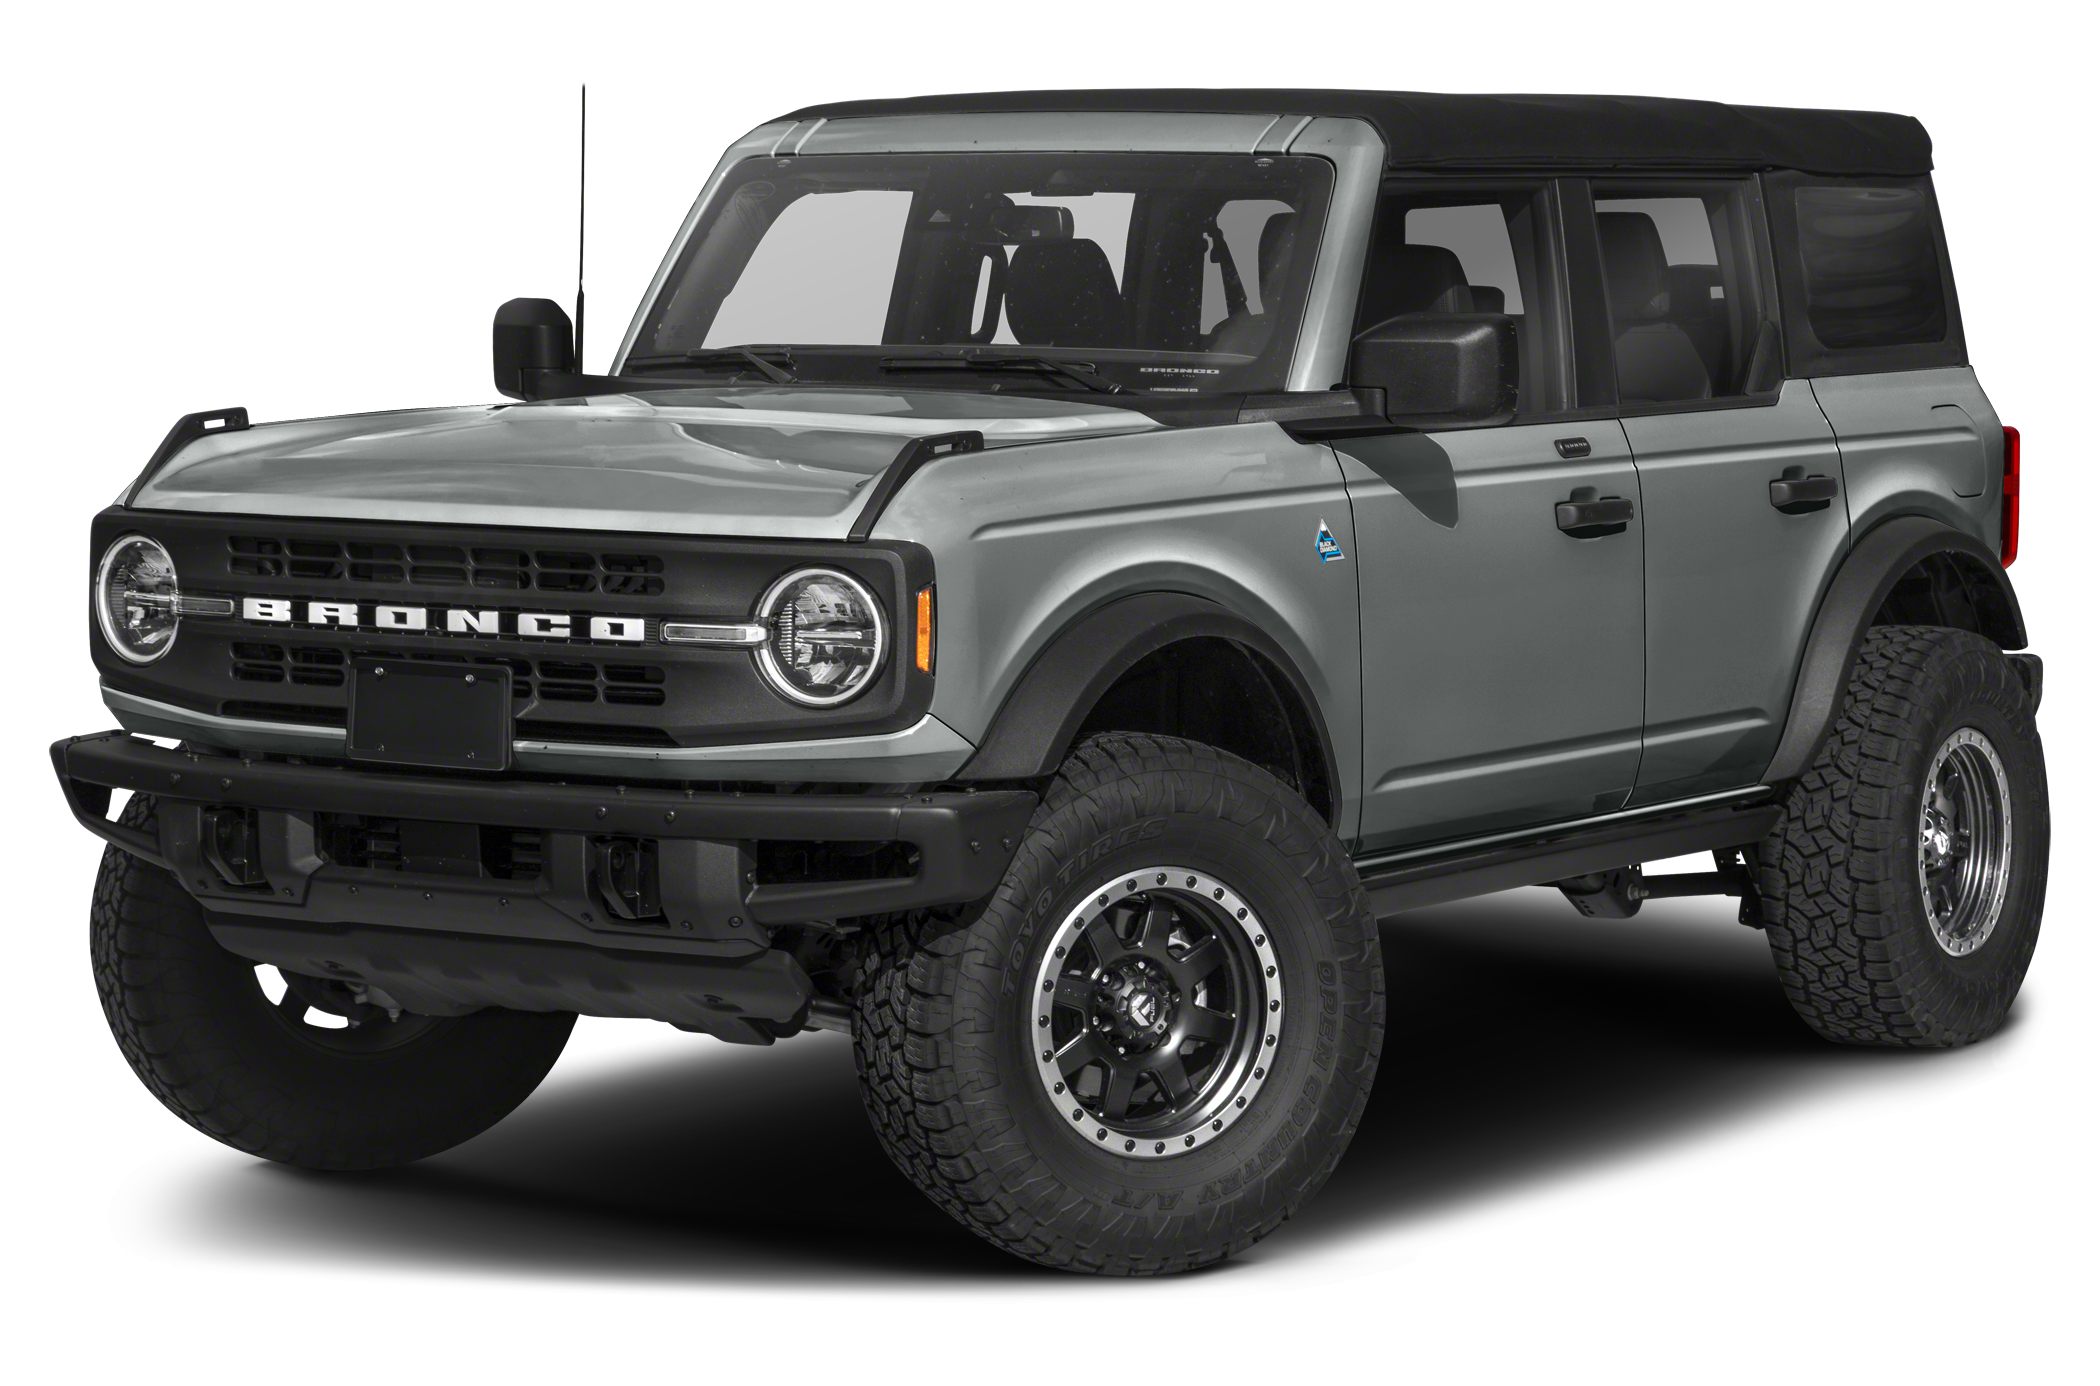 Great Deals on a new 2021 Ford Bronco Black Diamond 4dr 4x4 at The